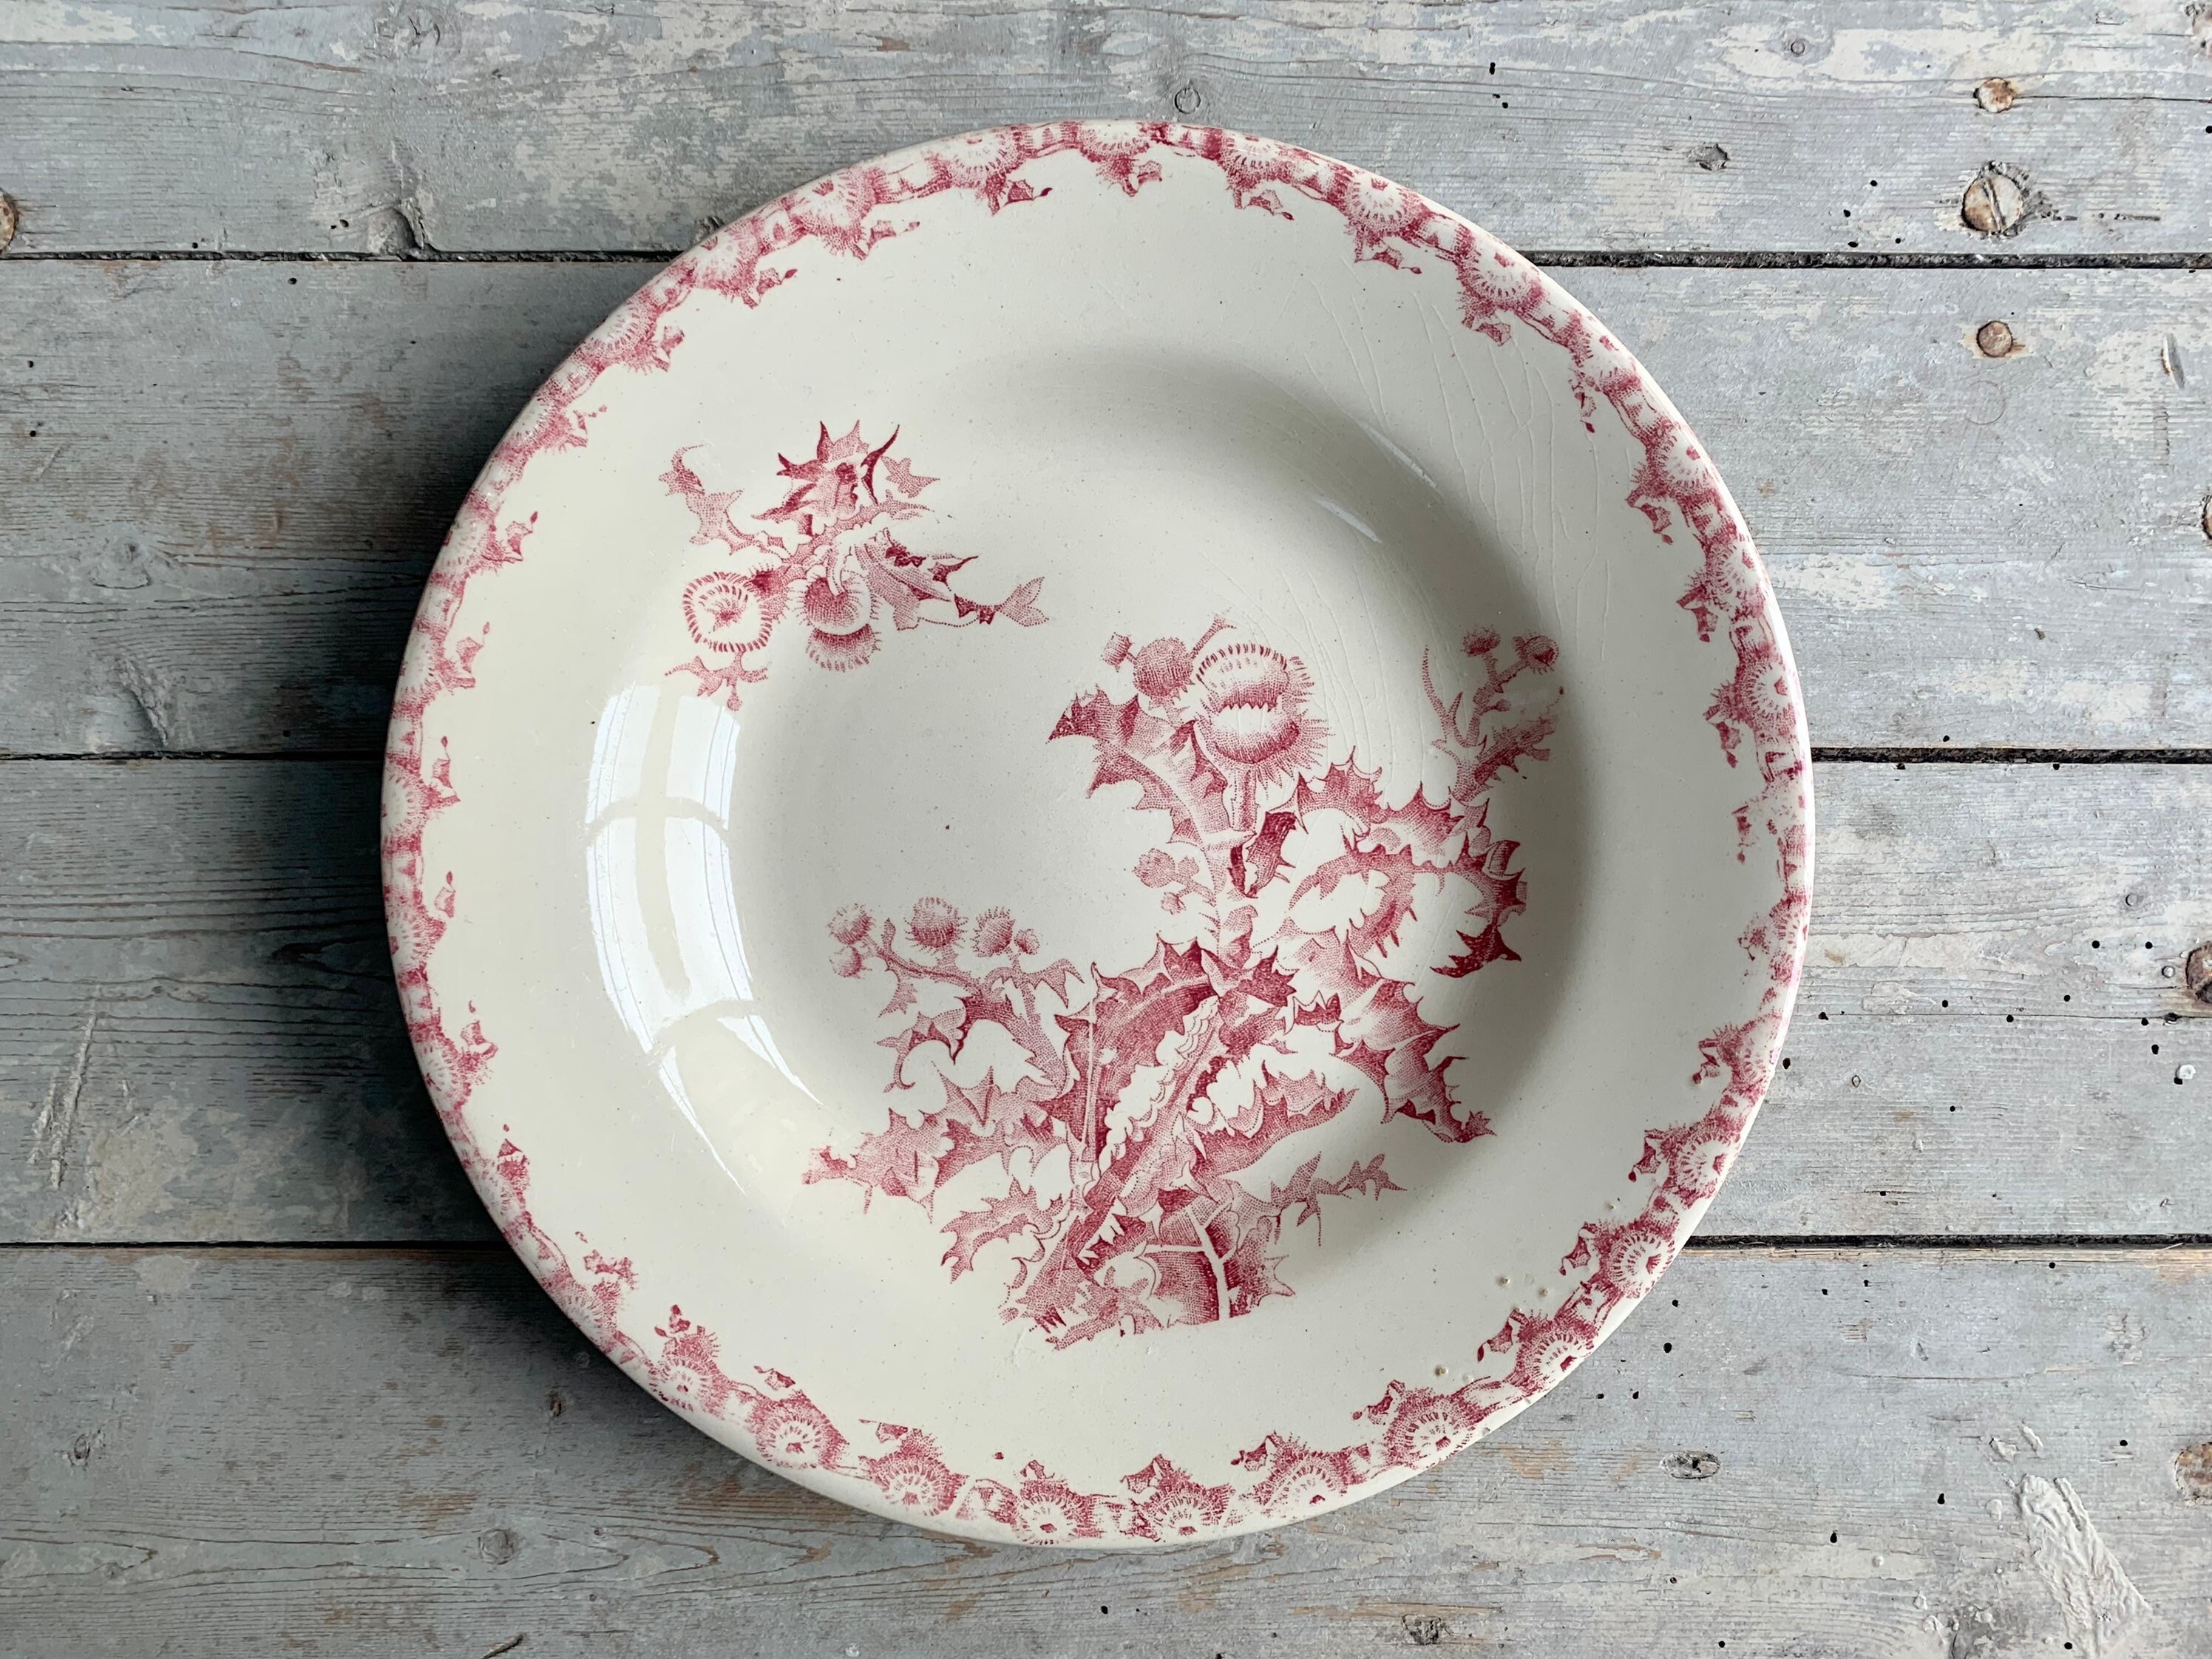 1880S ~ Ironstone Terre de Fer Soup Plates Transferware Pink French Antique Made in France By Gien -